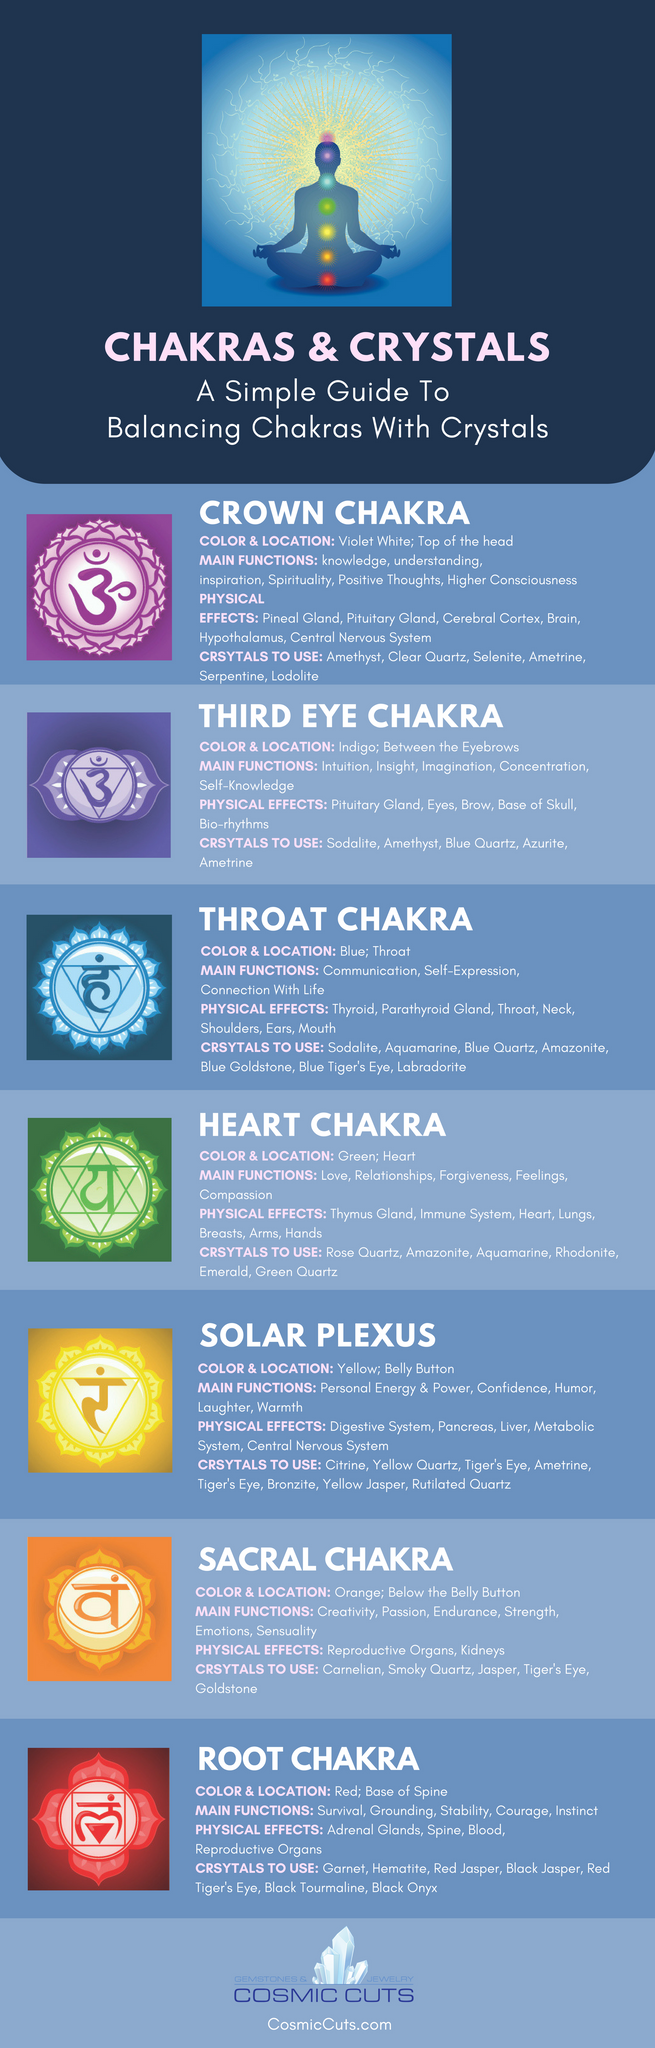 How To Use Crystals For The Best Chakra Healing Cosmic Cuts C